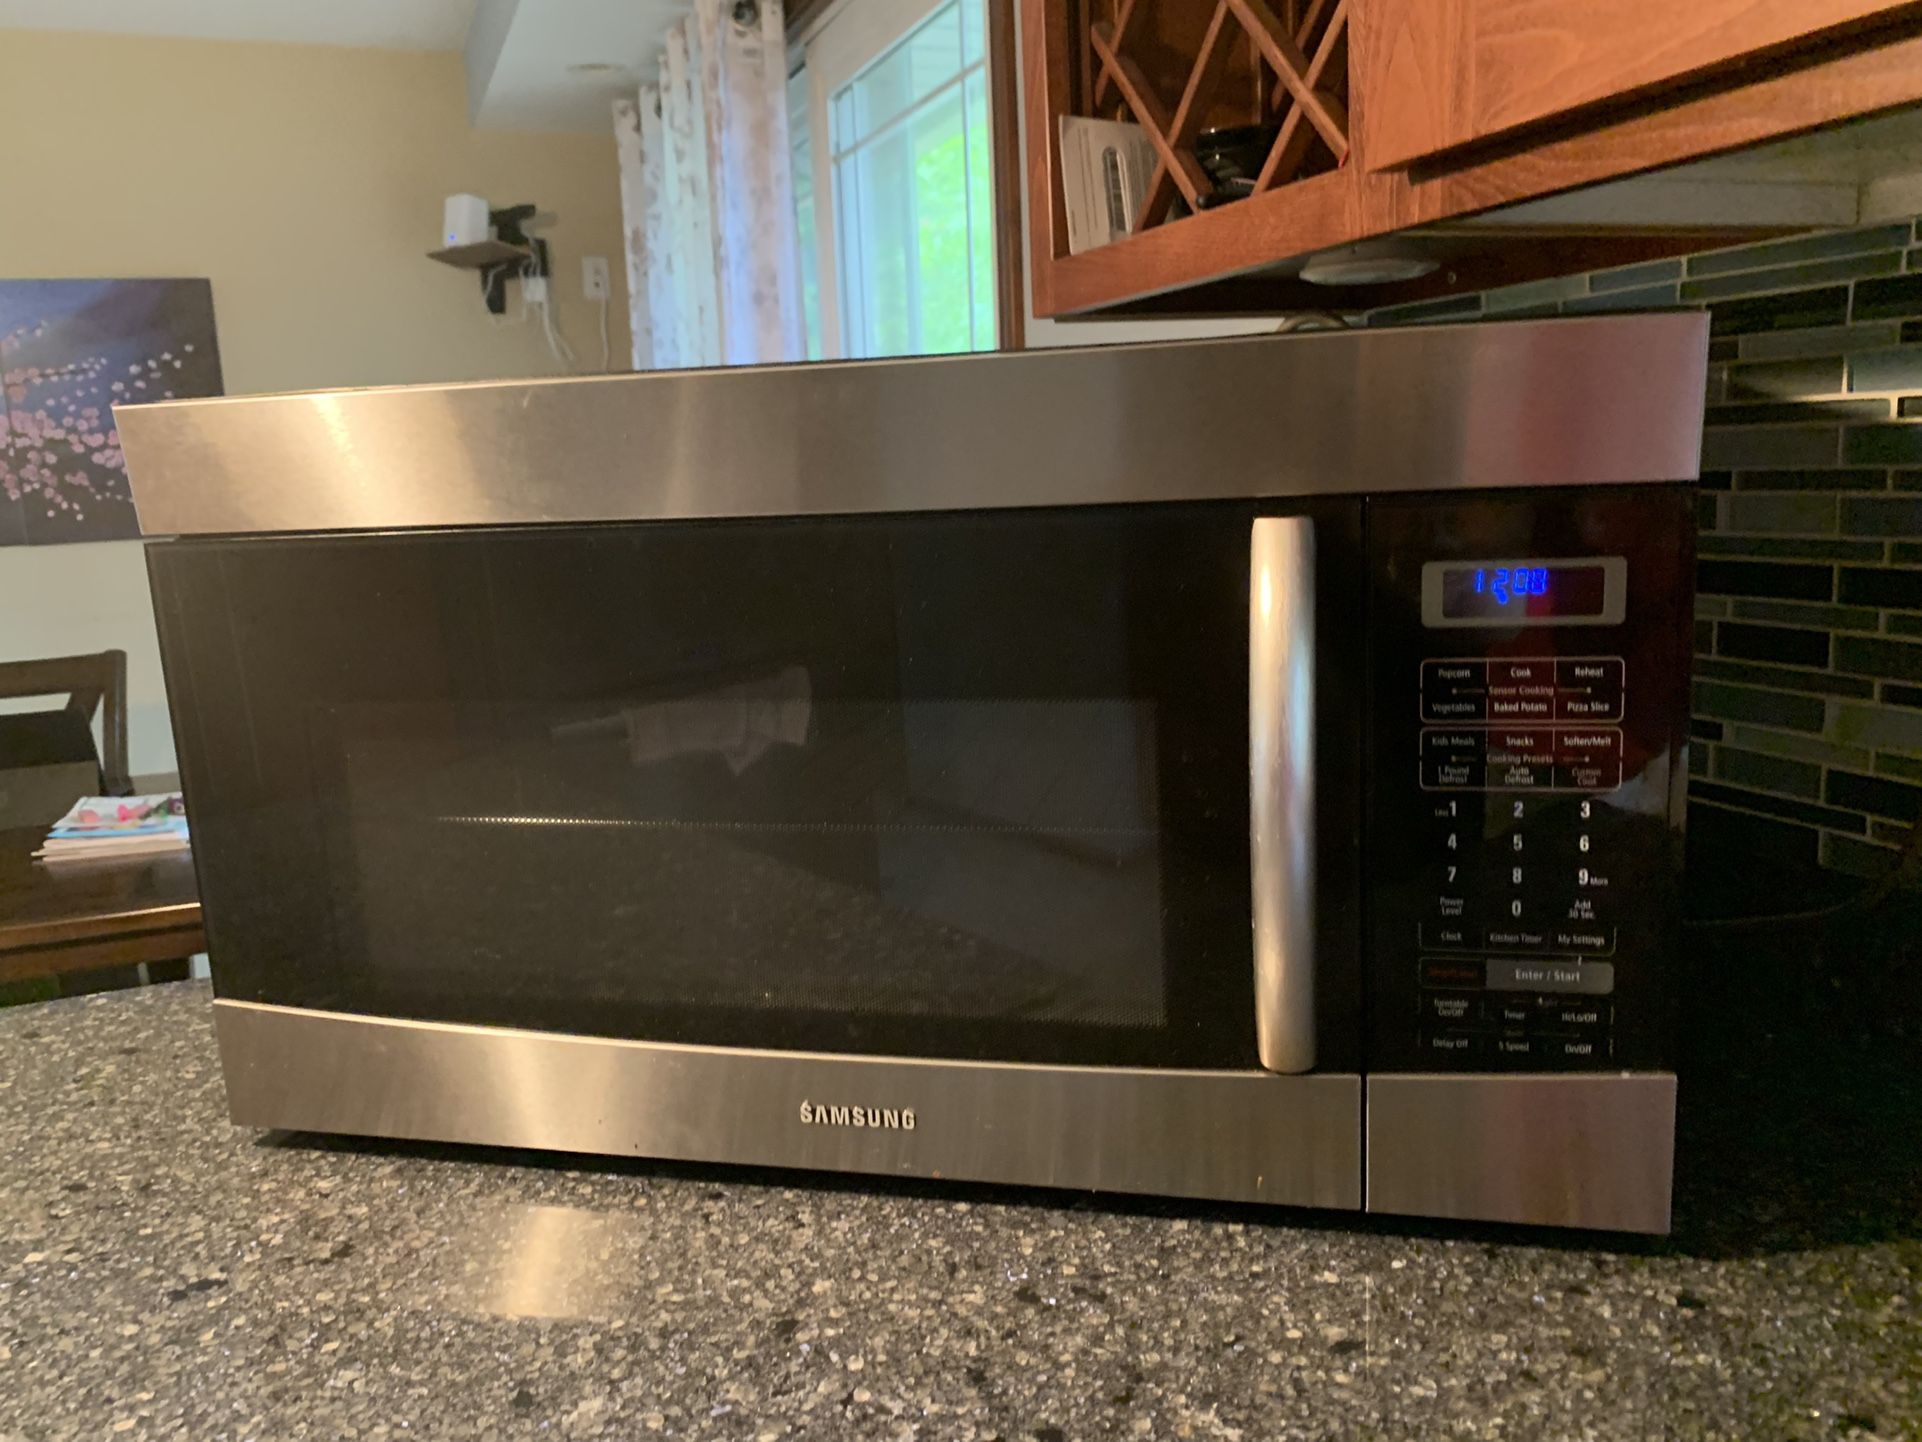 Samsung Over  the Range Microwave Oven